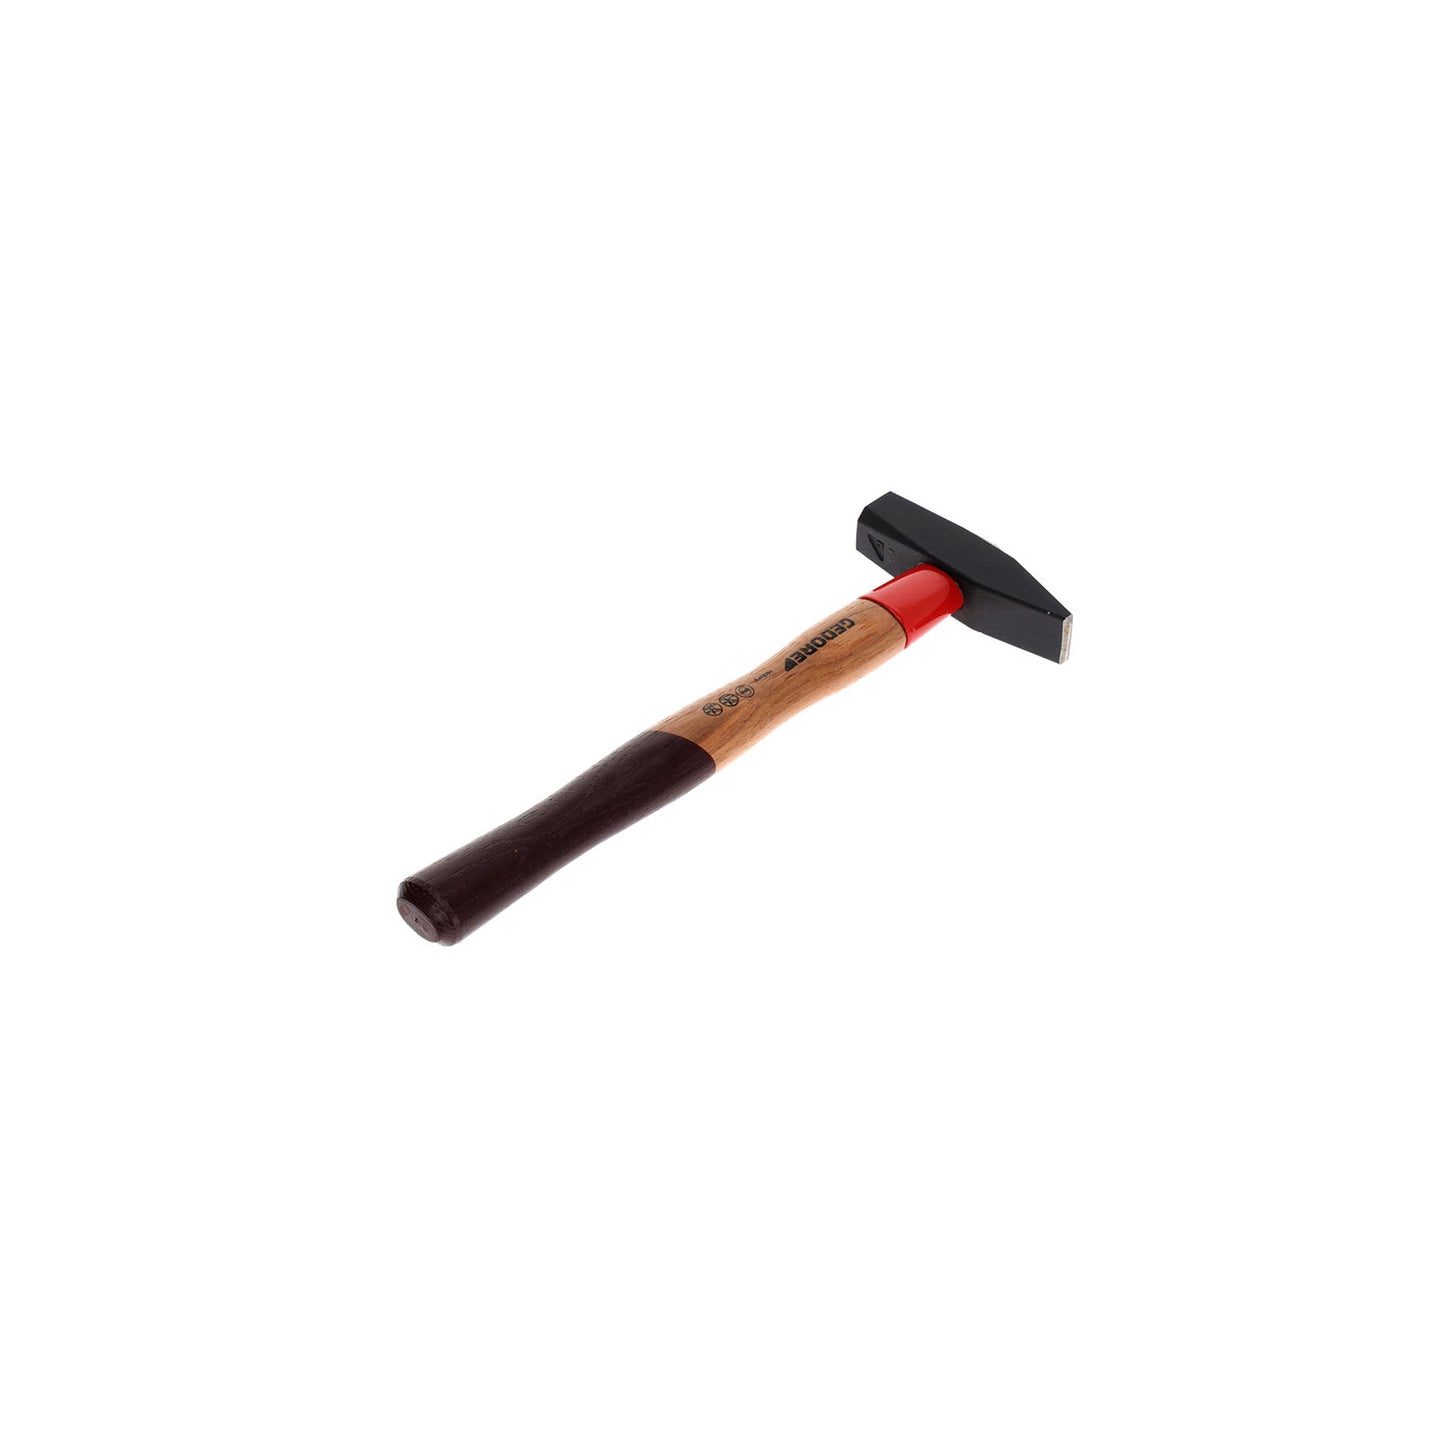 GEDORE 600 H-400 - ROTBAND assembly hammer 400g (8583150)